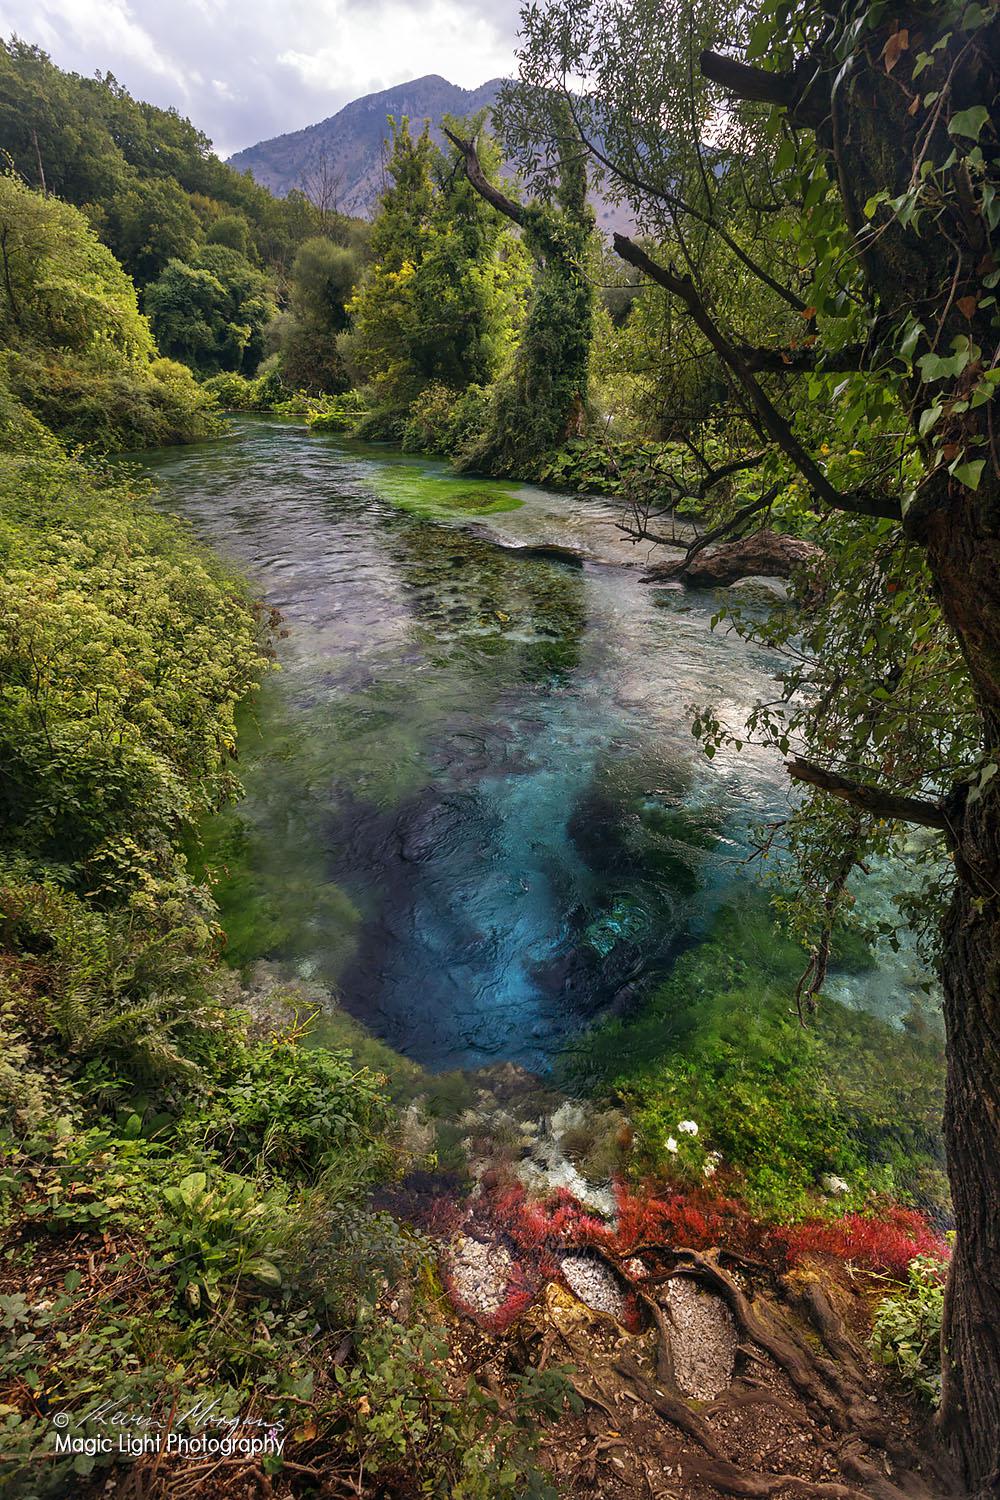 The amazing Blue Eye Spring near Sarande in Albania. It's over 50 metres deep and to date no-one has ever reached the bottom.